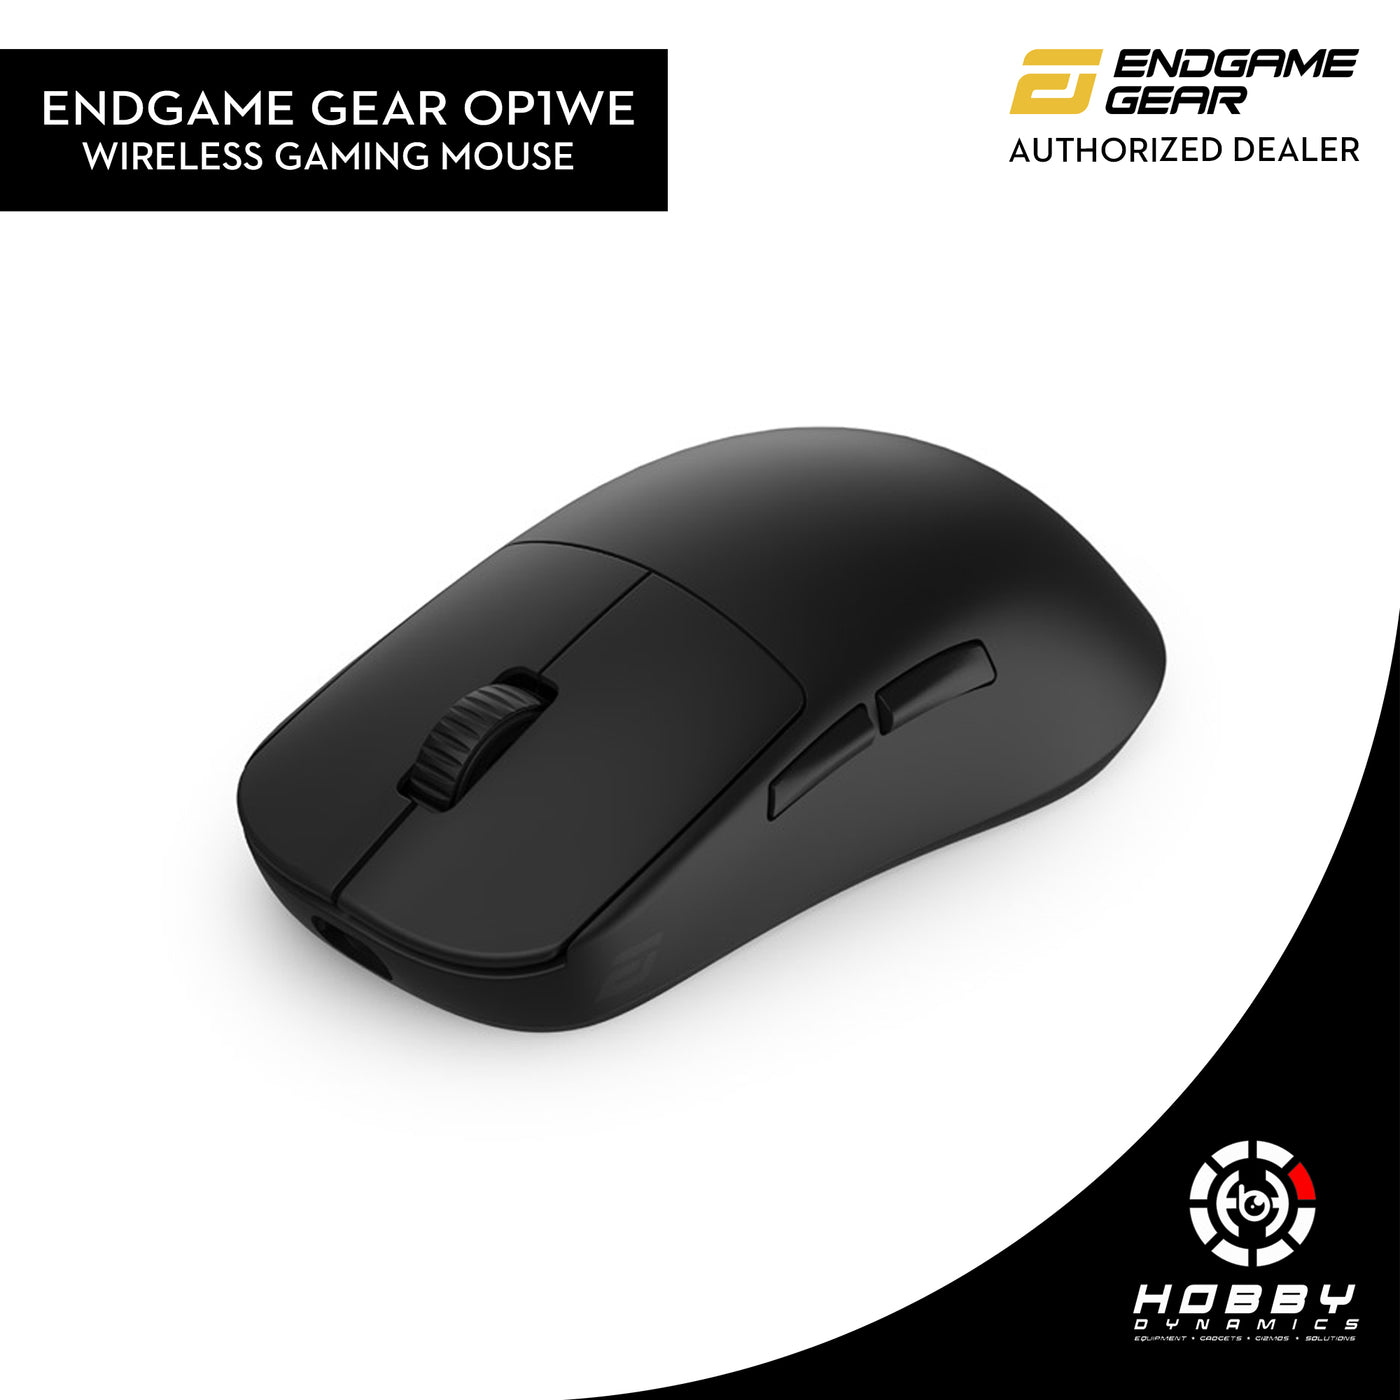 Endgame Gear OP1we Wireless Gaming Mouse